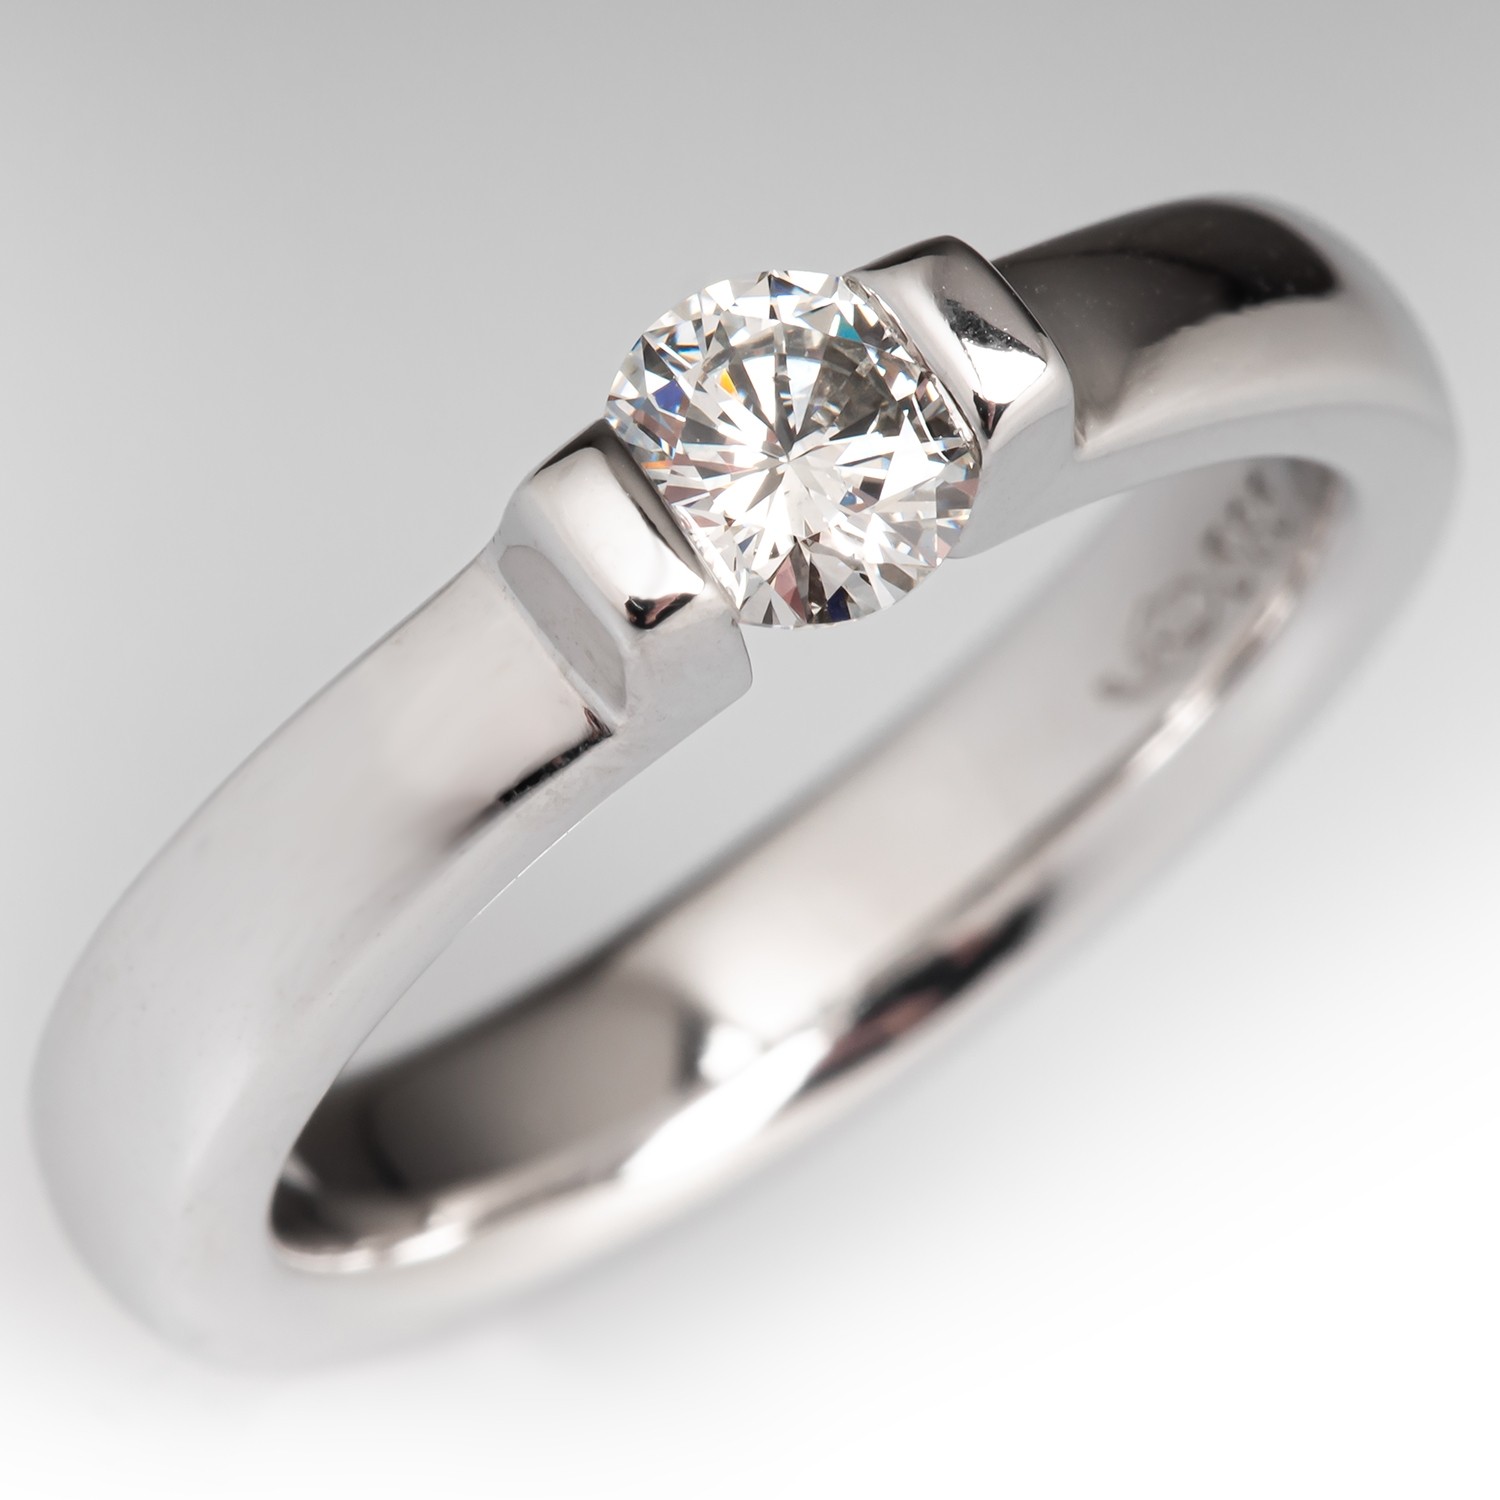 Diamond Tension Set Engagement Ring | Abby Sparks Jewelry